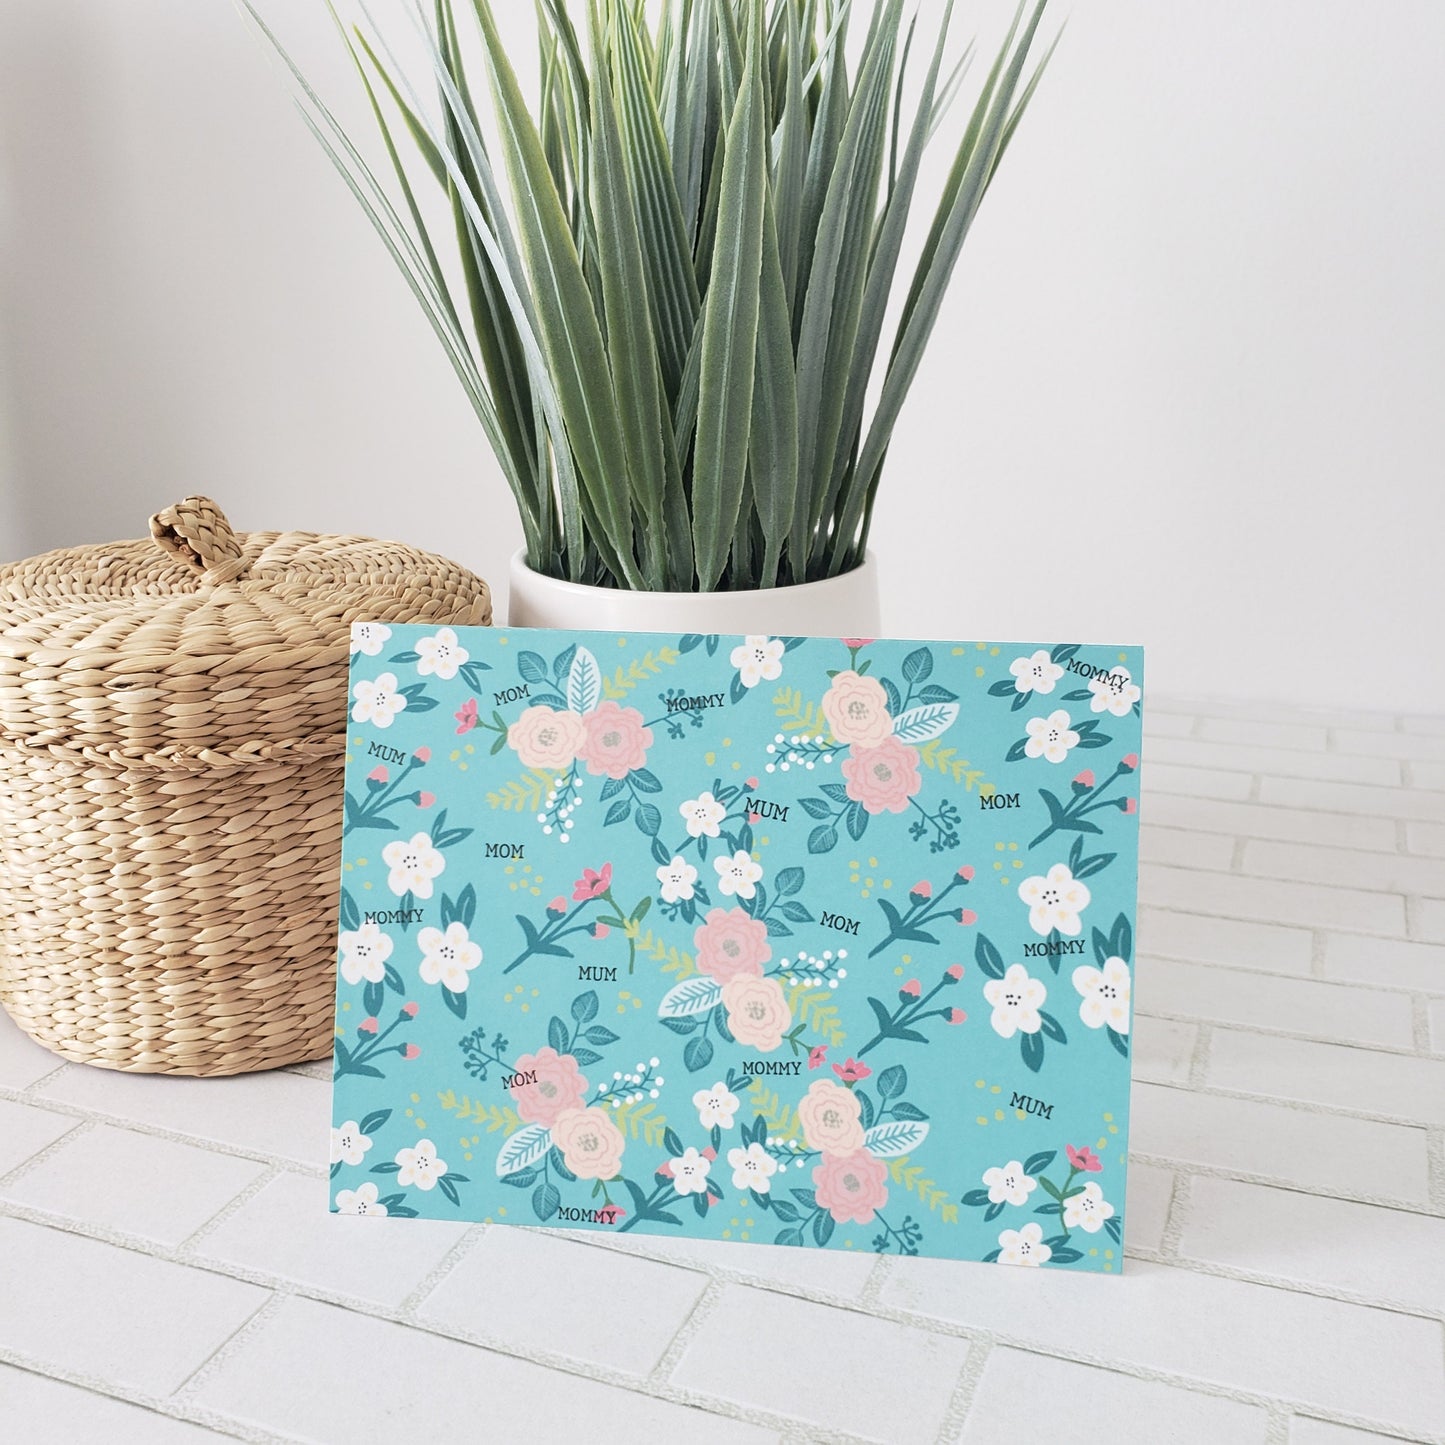 Greeting Card For Mom Blank Floral And Blue Turquoise Print With Mom, Mum, Mommy